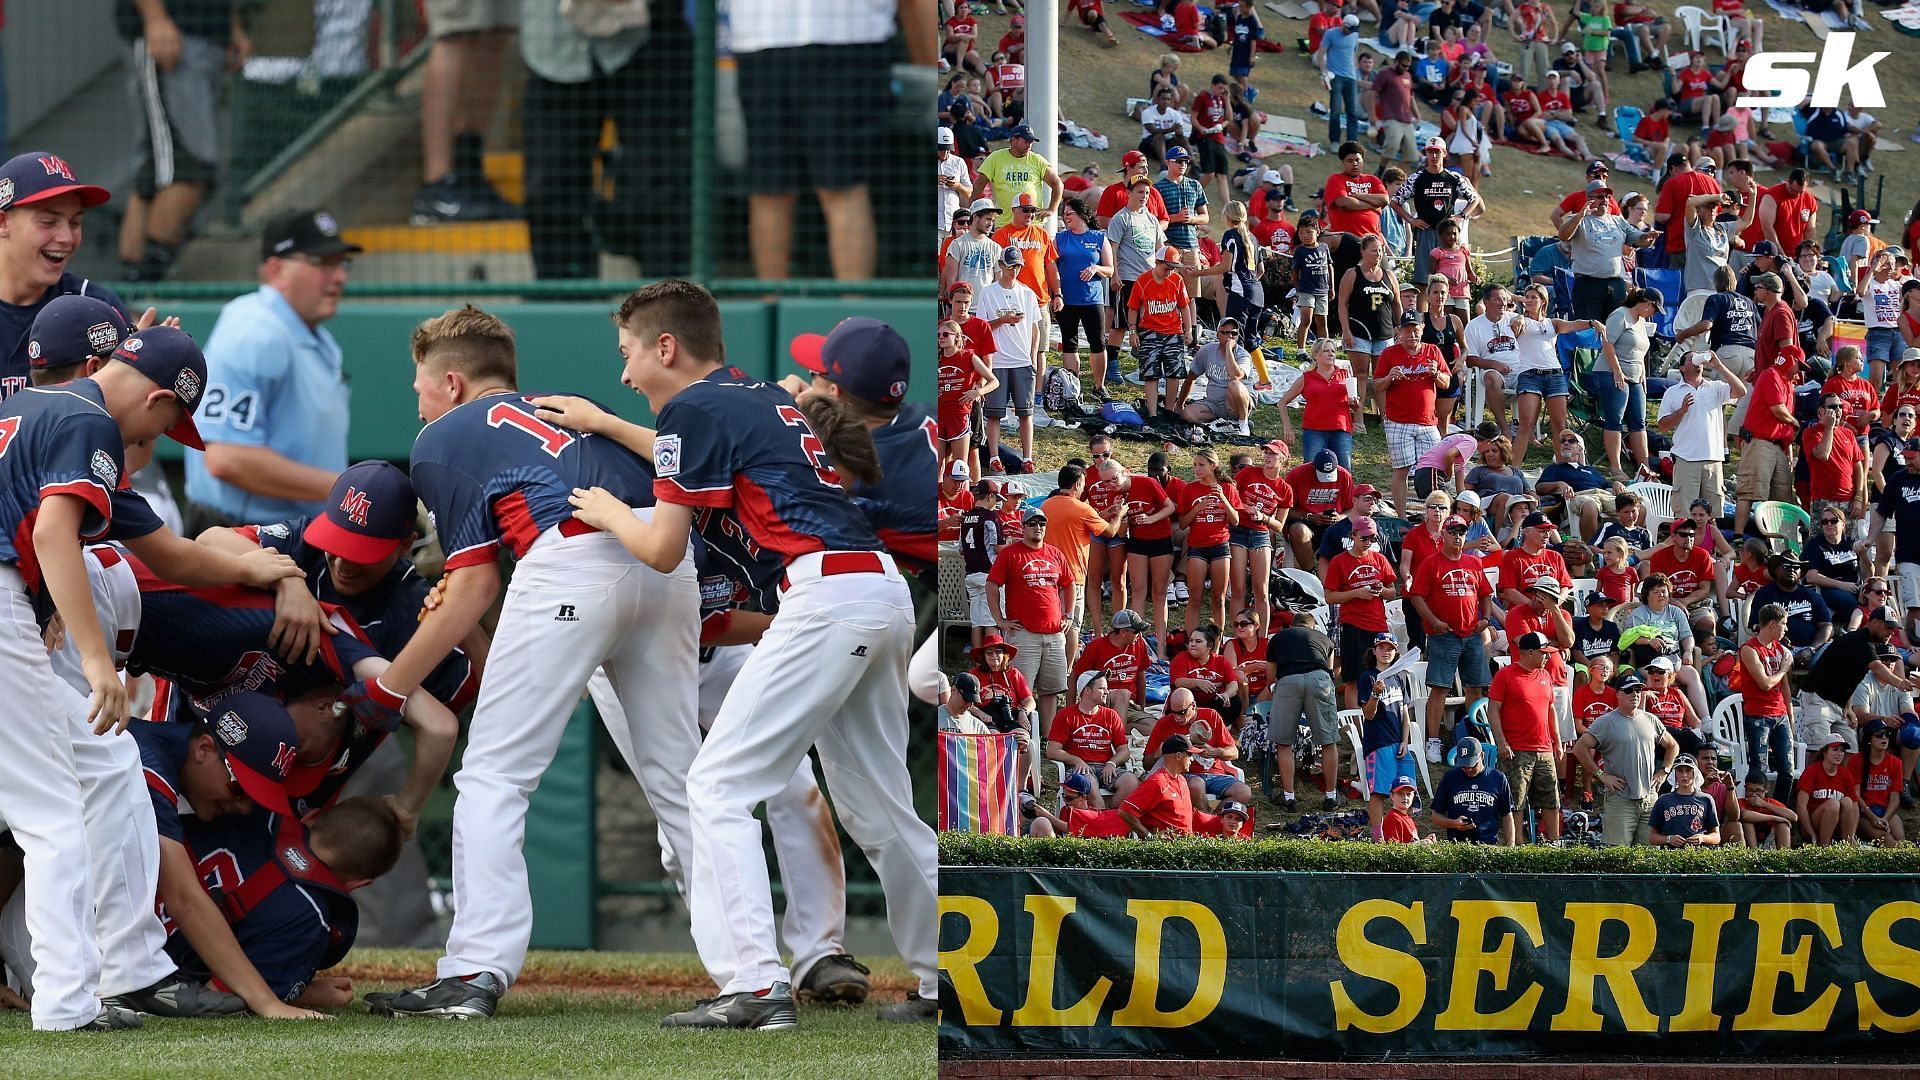 Illinois vs Ohio Little League World Series 2023 Start time, TV and streaming details